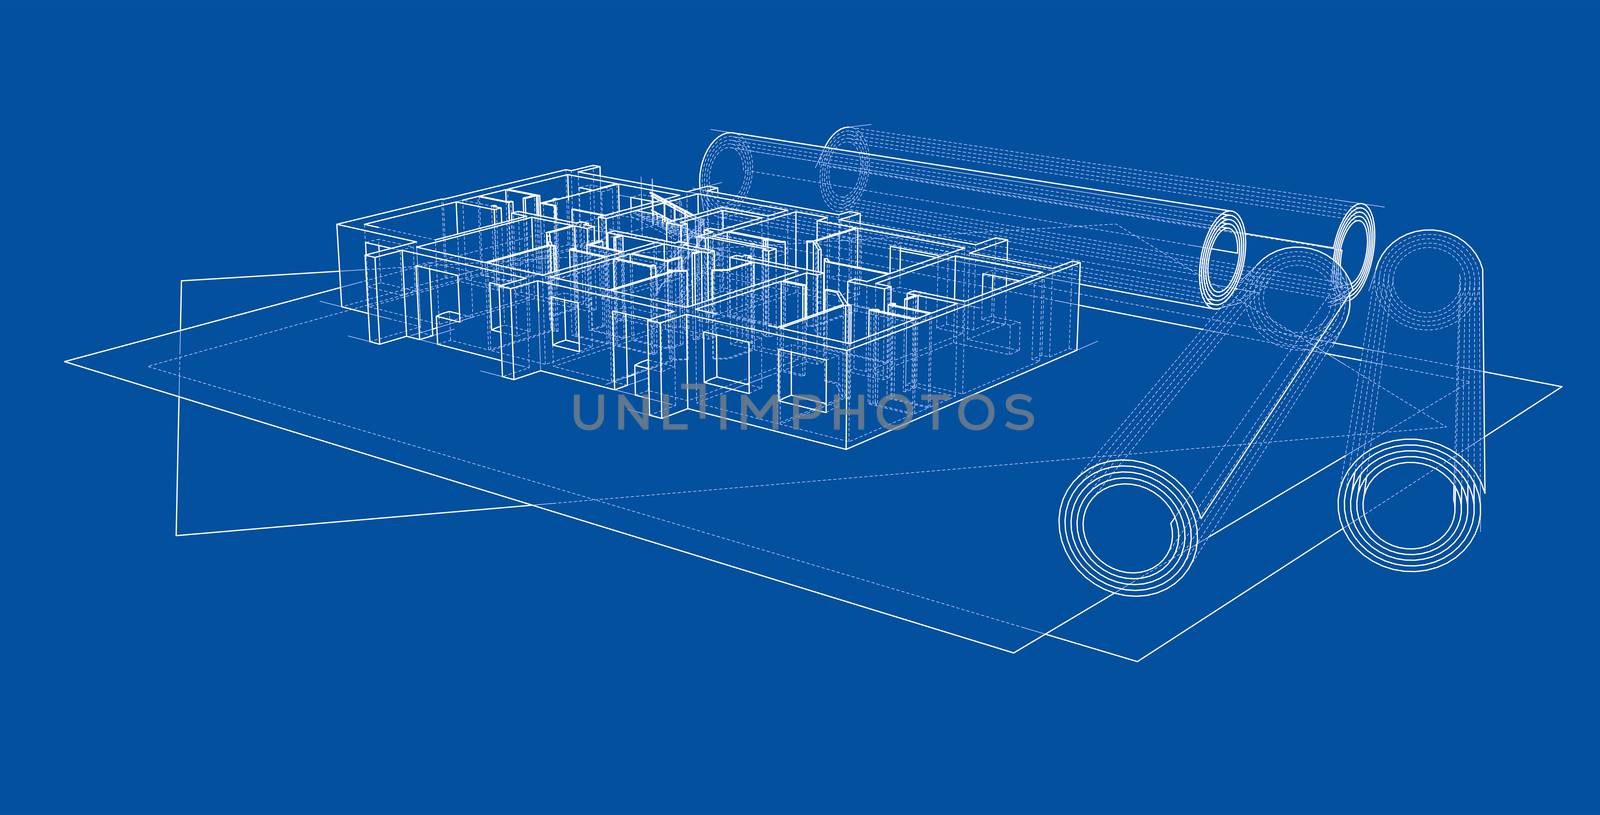 Drawings with floor model. 3d illustration. Wire-frame style. Blue background